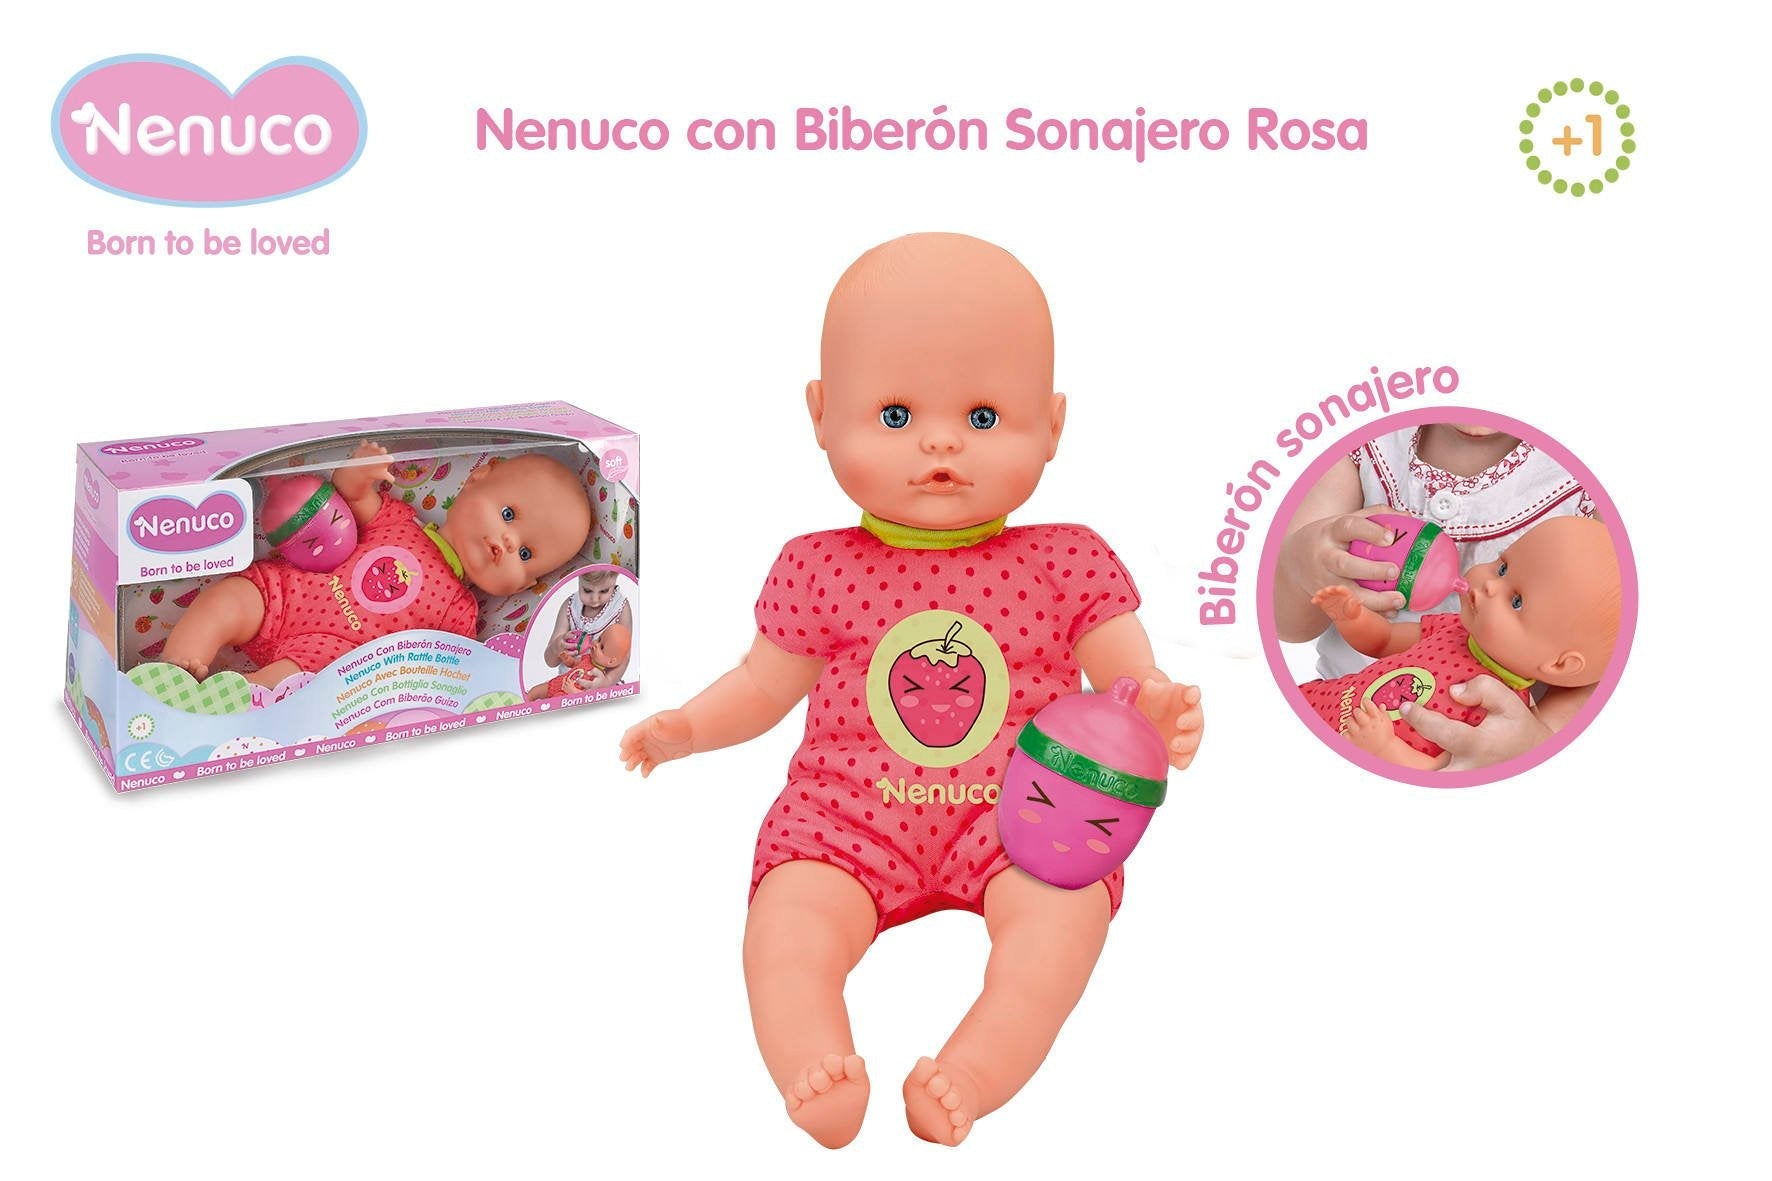 Nenuco - Soft Baby Doll with Rattle Bottle, Colorful Outfits, 35